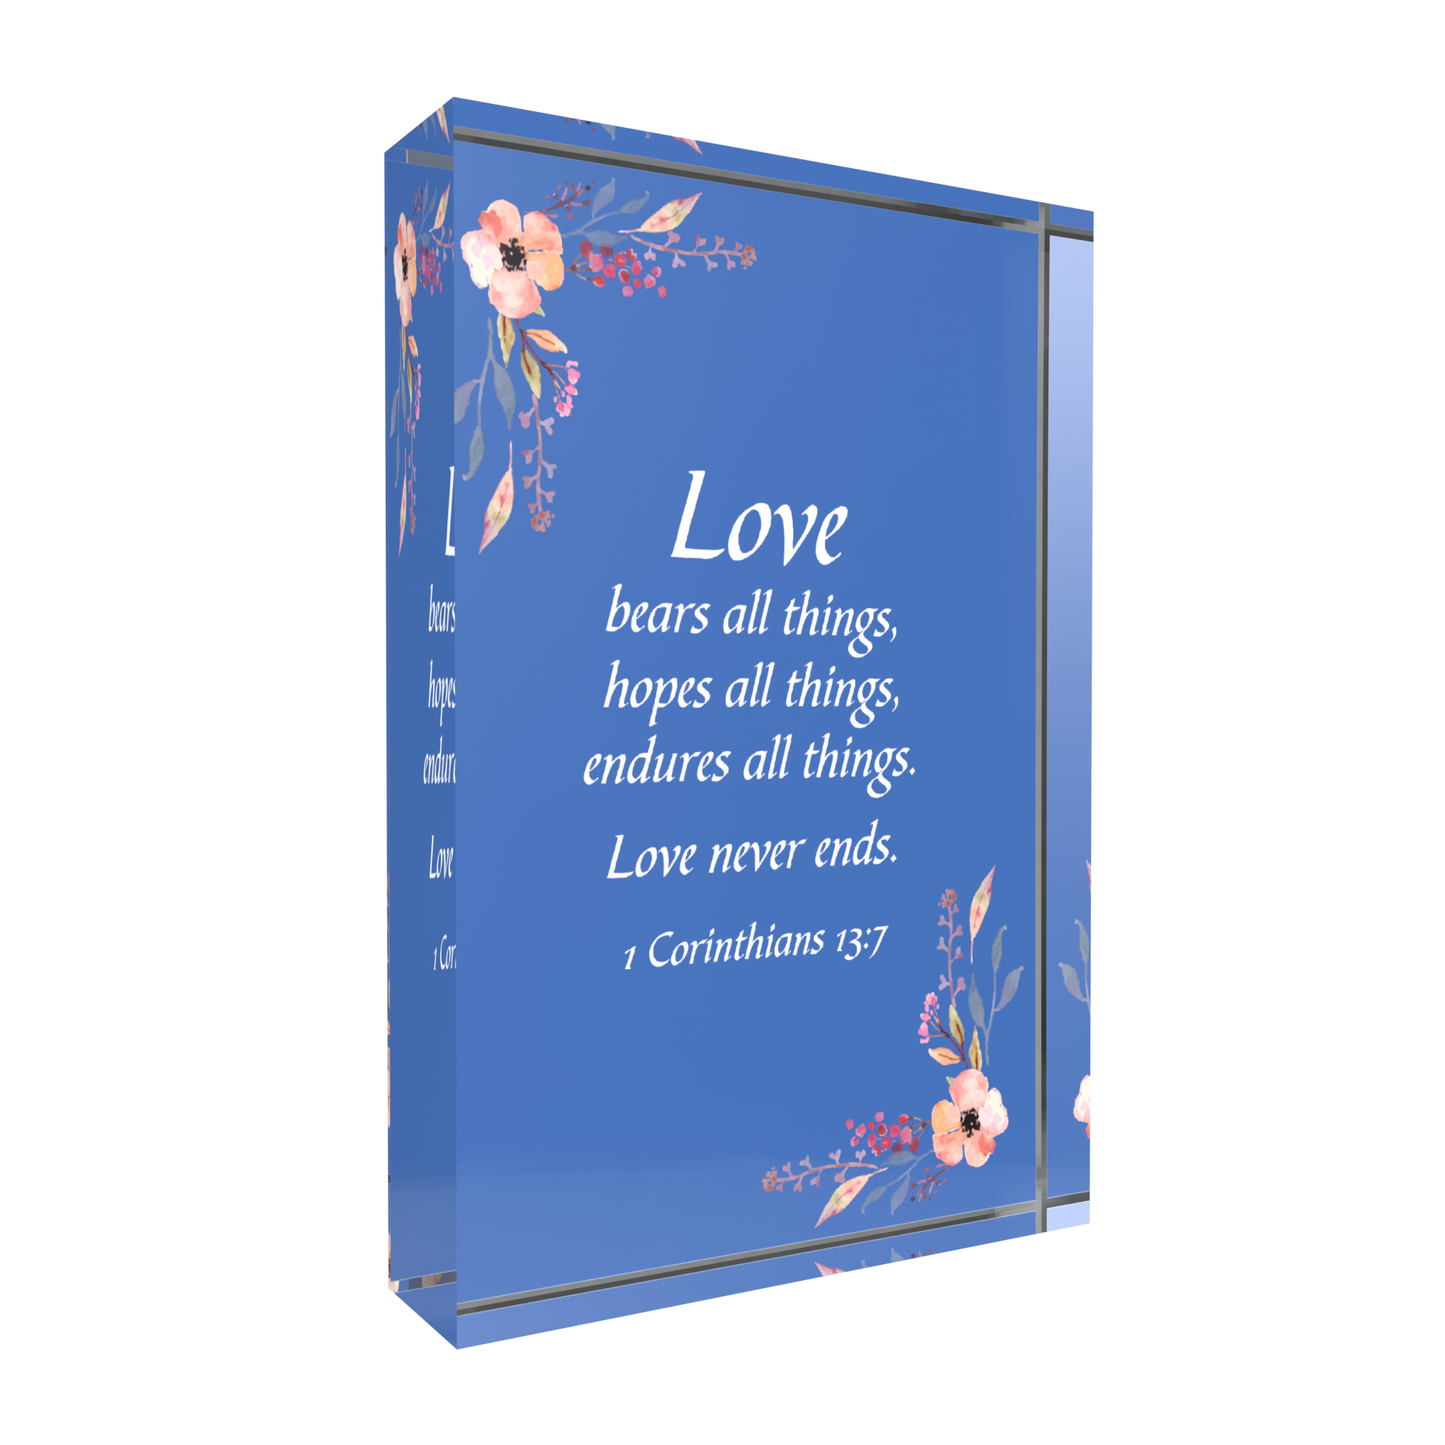 Inspirational Lucite Plaque - Love Bears All Things